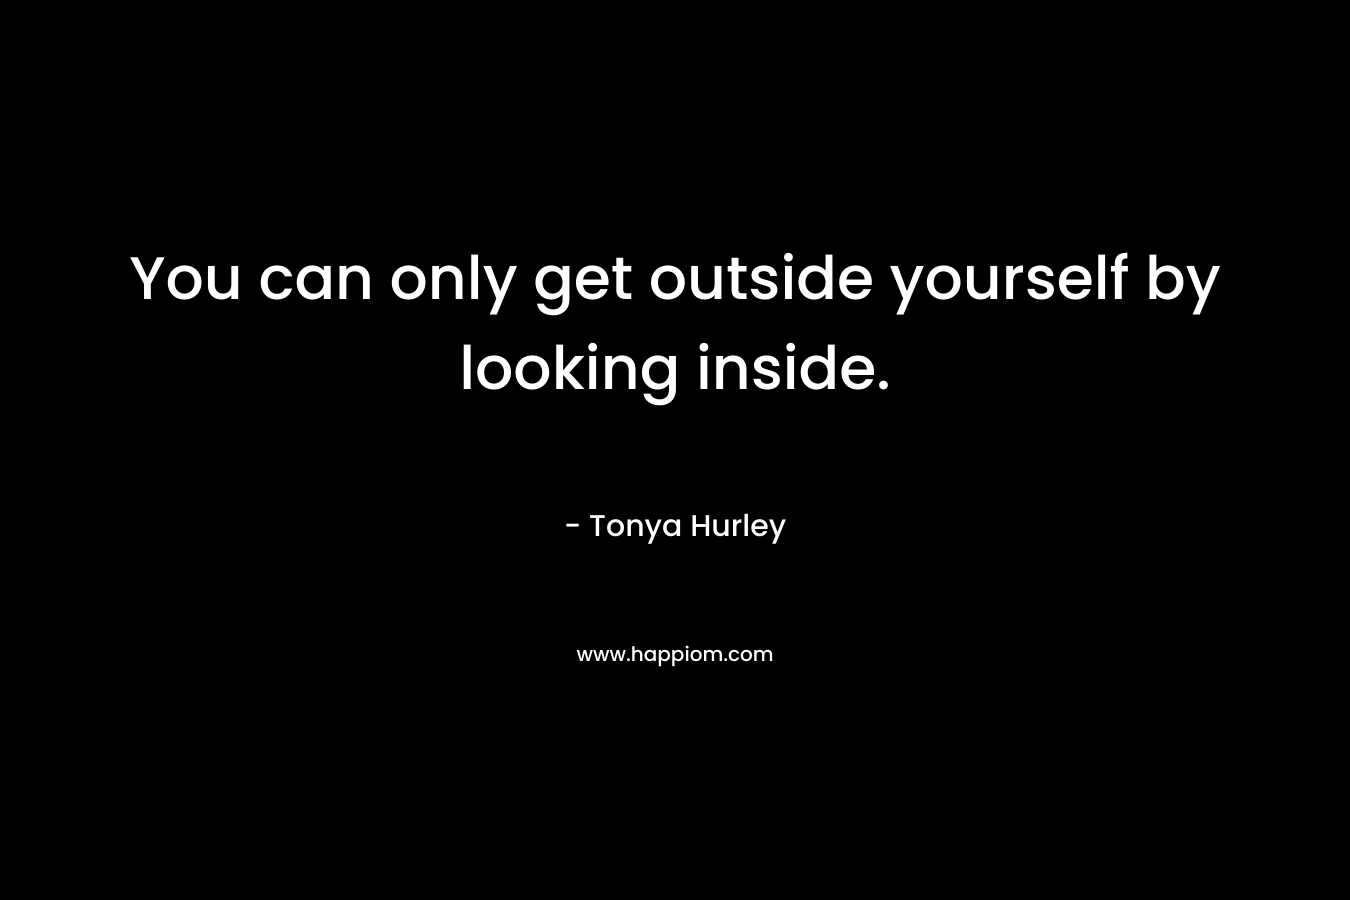 You can only get outside yourself by looking inside. – Tonya Hurley